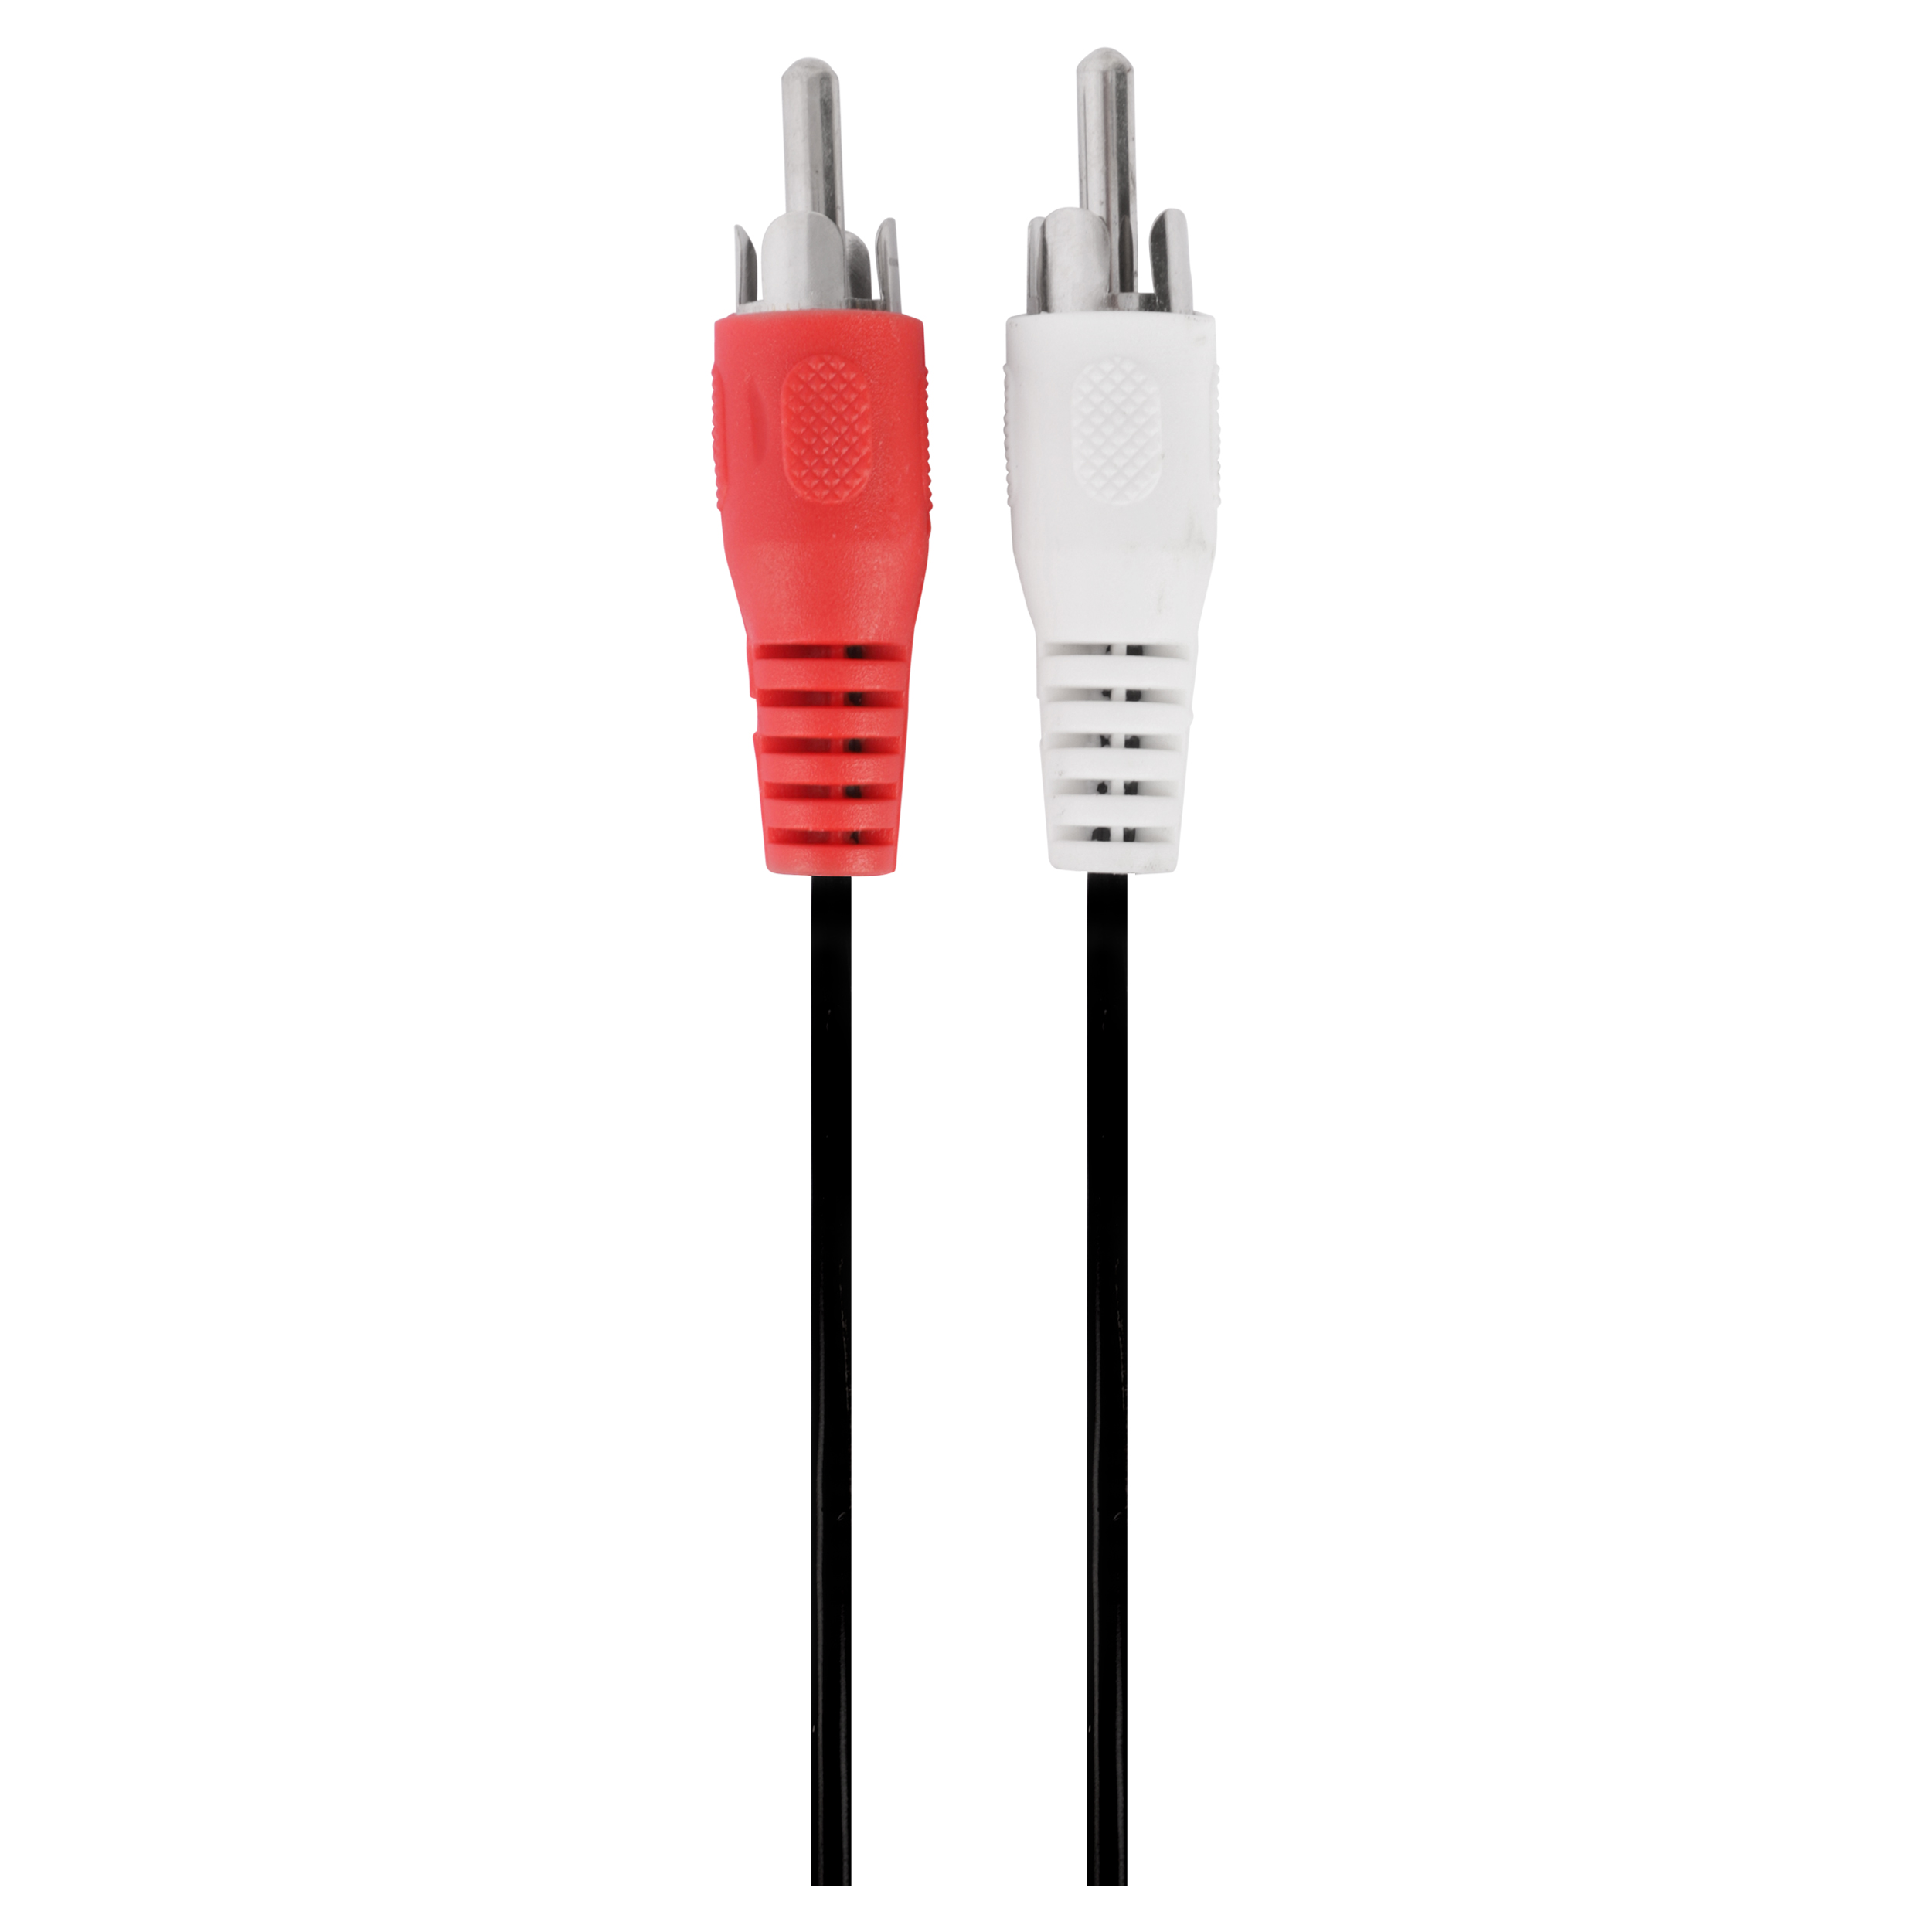 00.131.65 Q-Link  tulp kabel 2 RCA-male - 2 RCA-male - 10 m - rood-wit